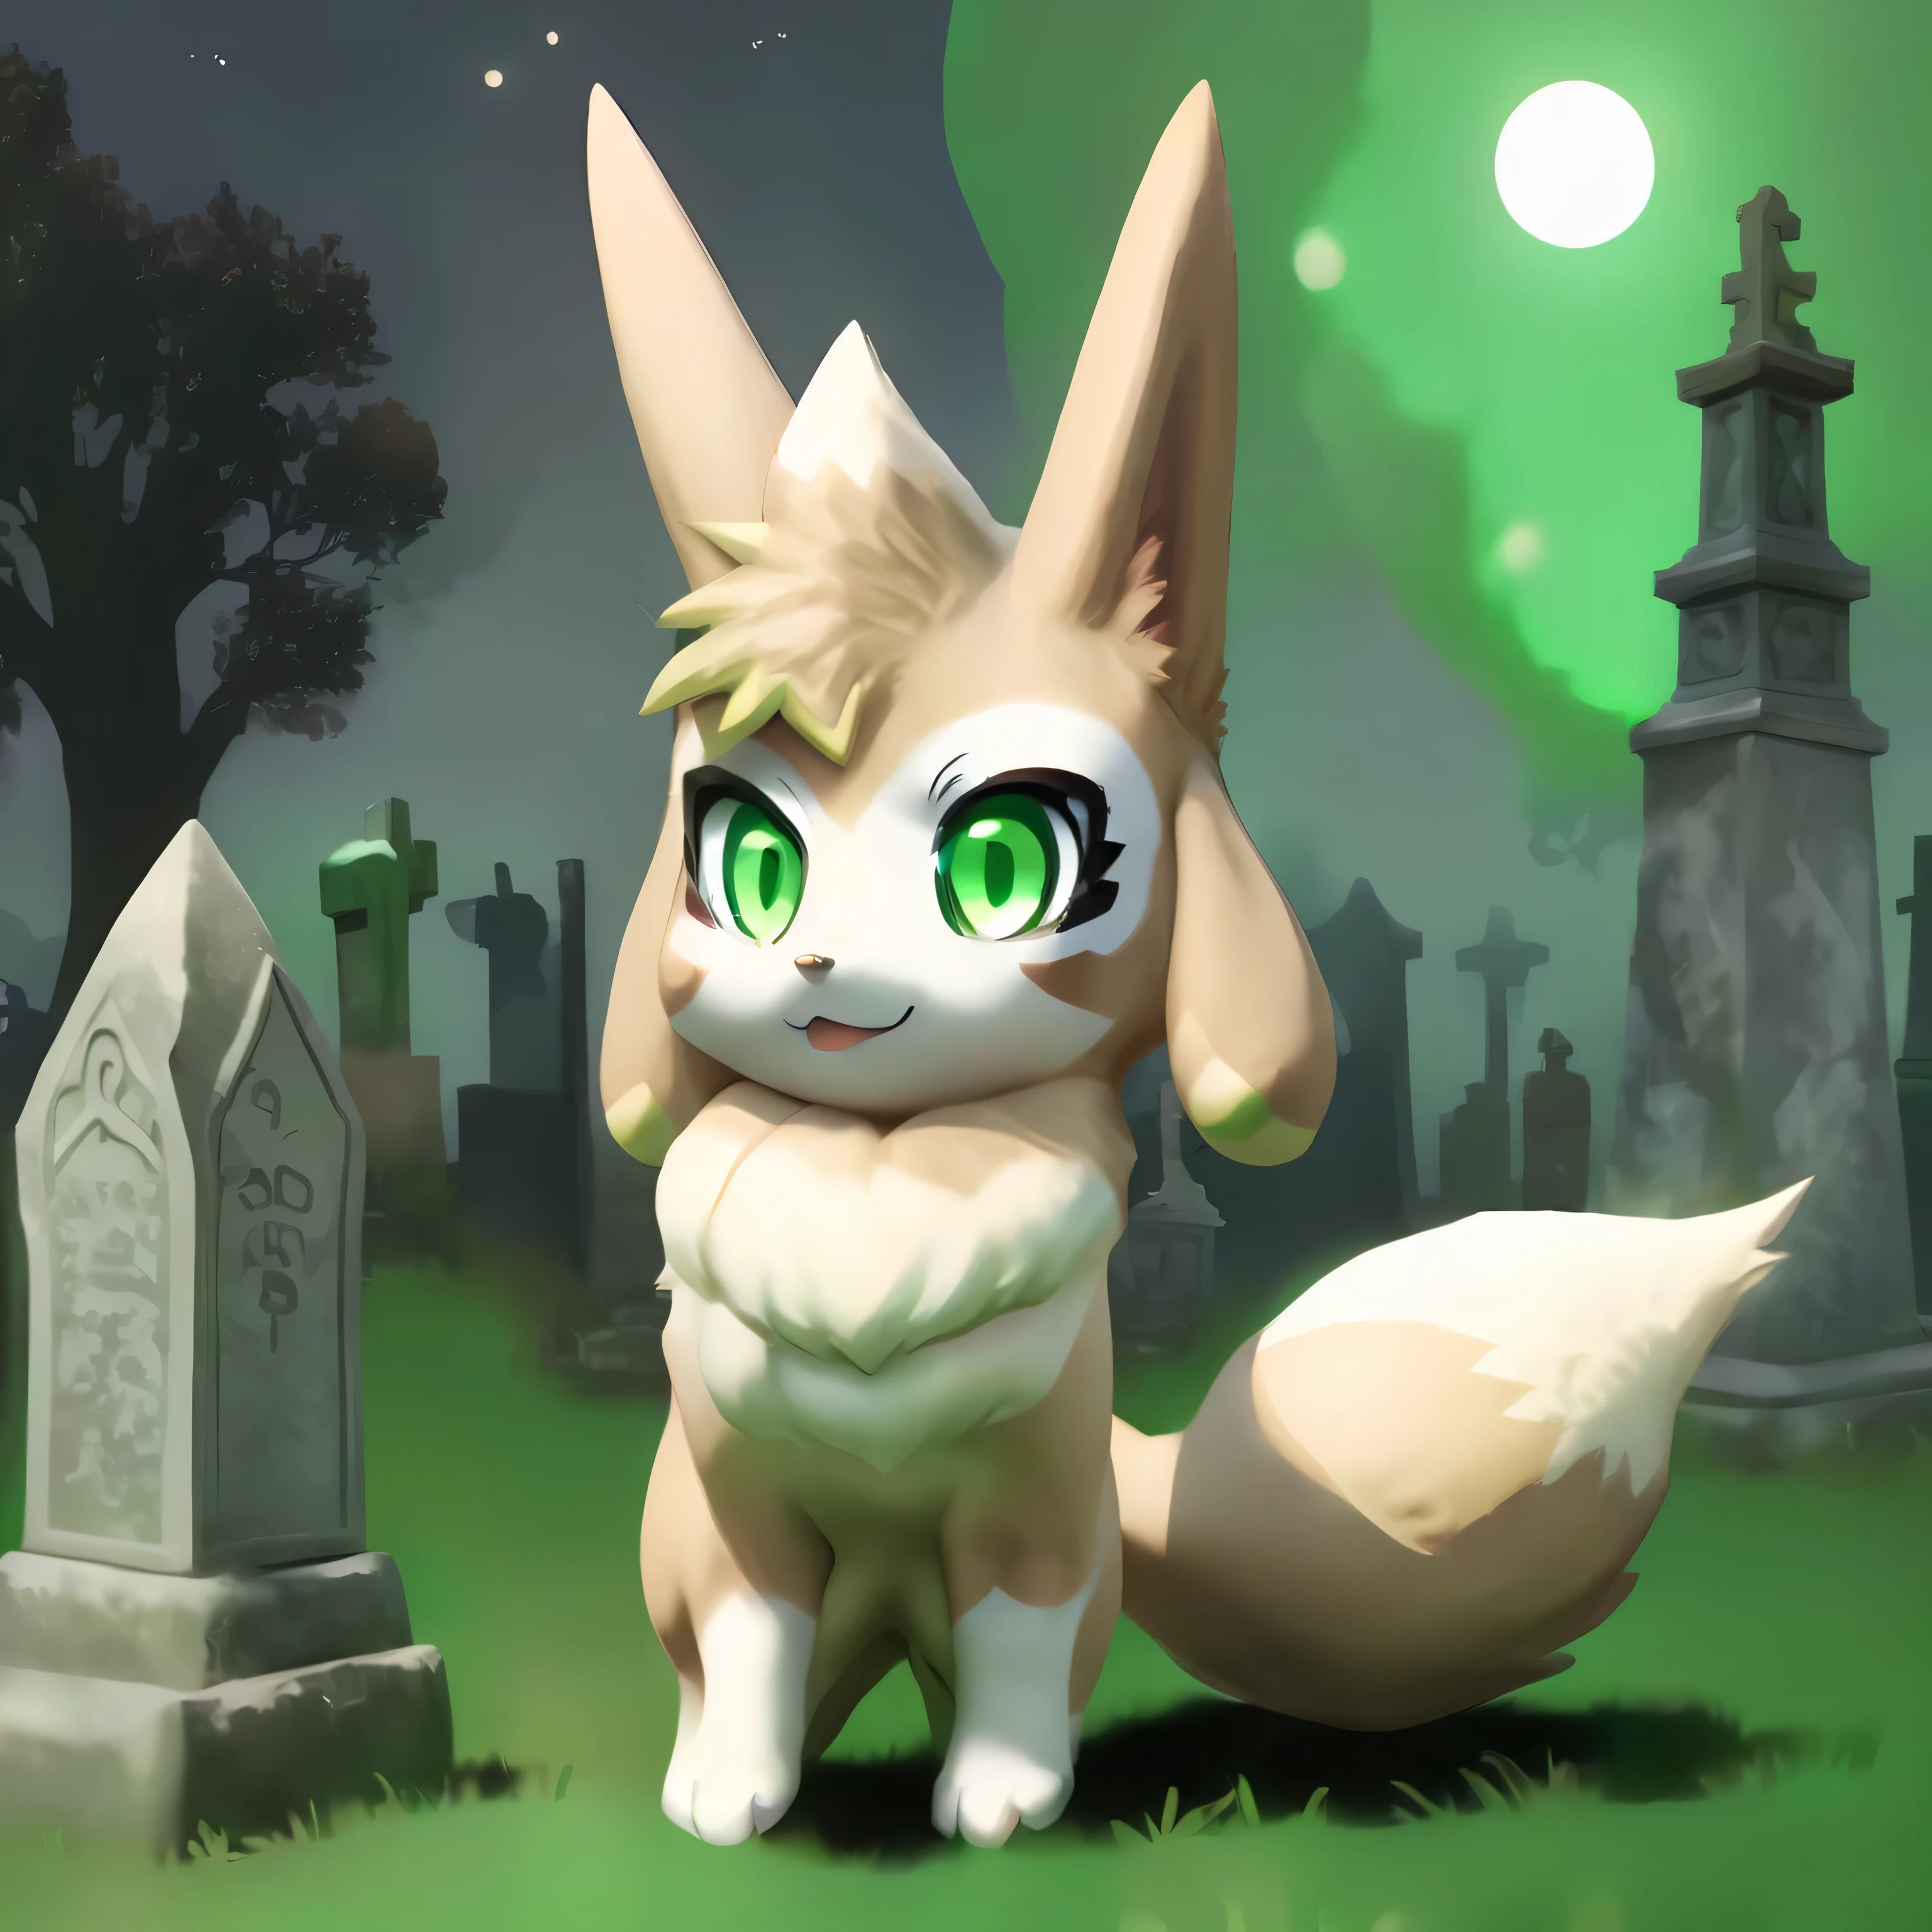 vxypwld style, cute vixy from palworld, big green eyes, beige and white fur, big fluffy tail, chest tuft, all fours, stops and poses for fashion photos in a graveyard, night, moonlight shadow, 8bit background, computer game theme